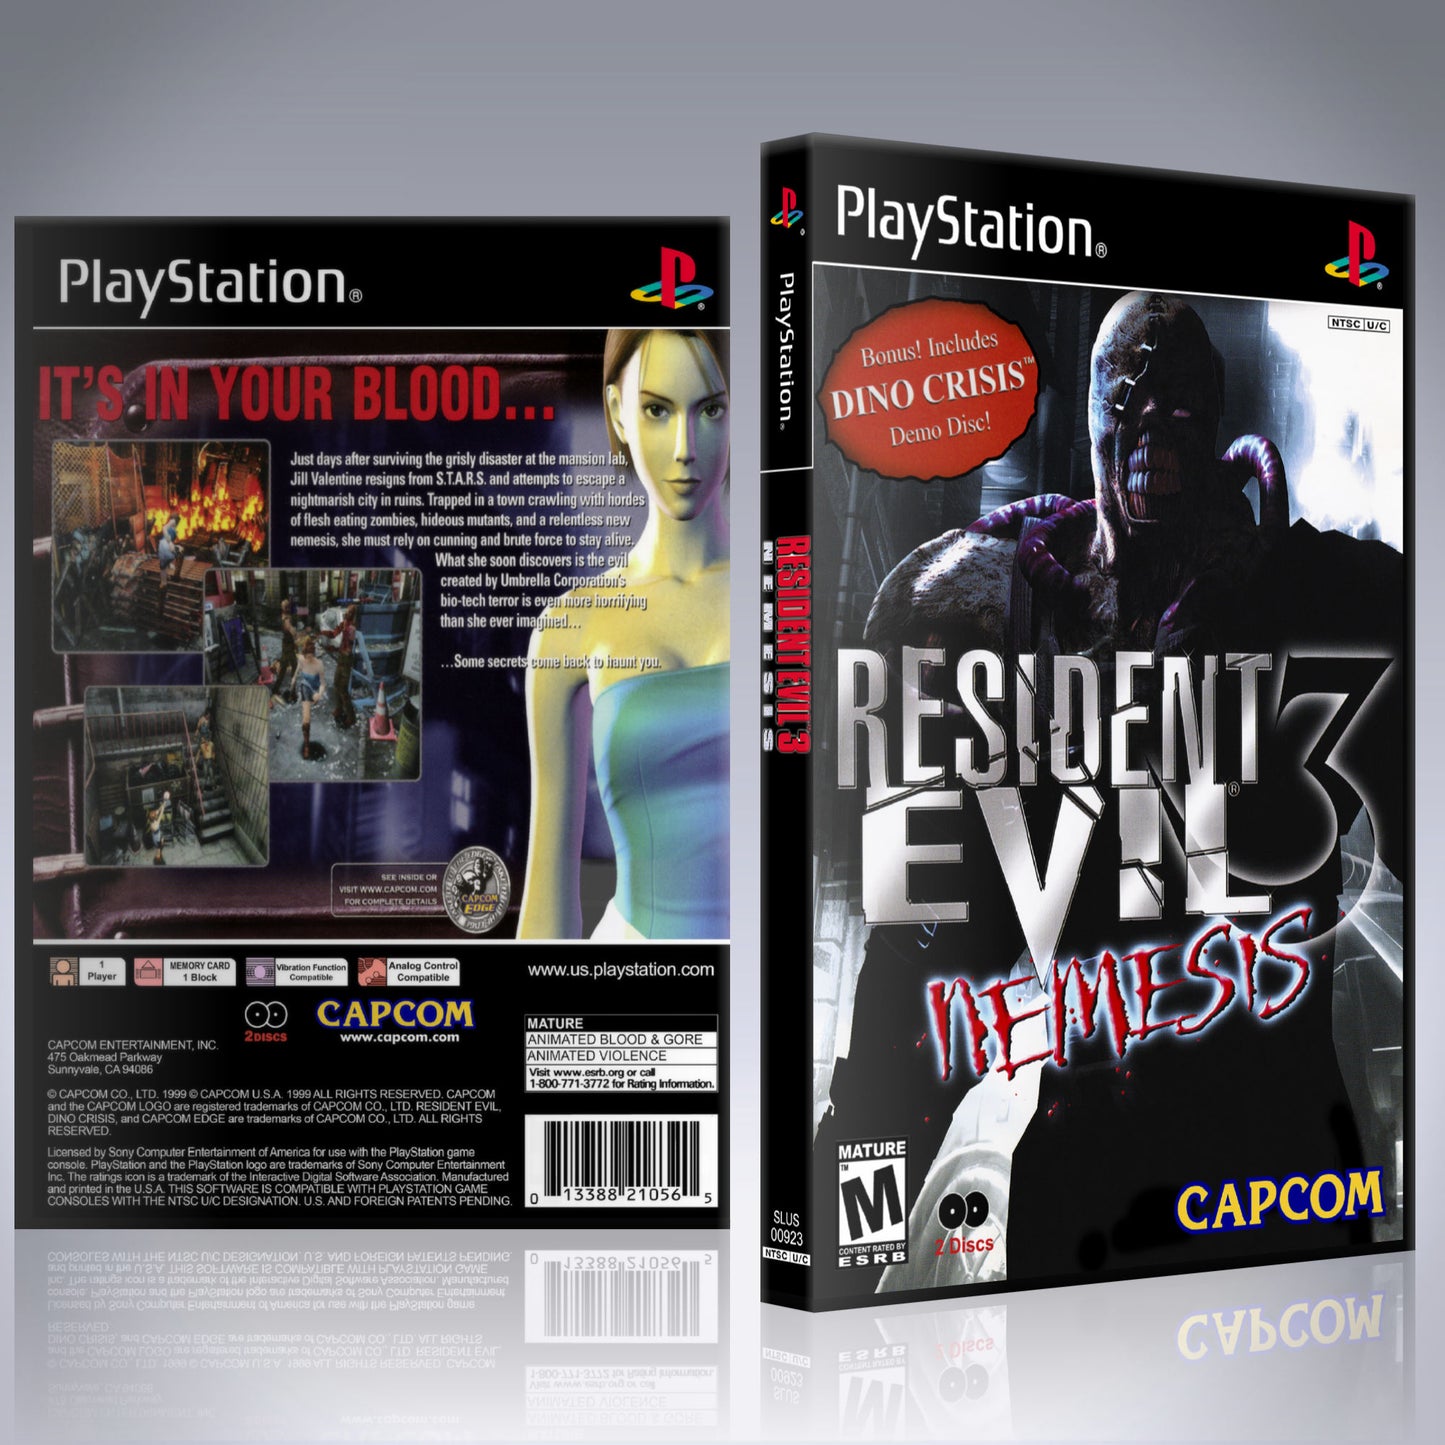 PS1 Case - NO GAME - Resident Evil 3 with Dino Crisis Demo [2 Disc]